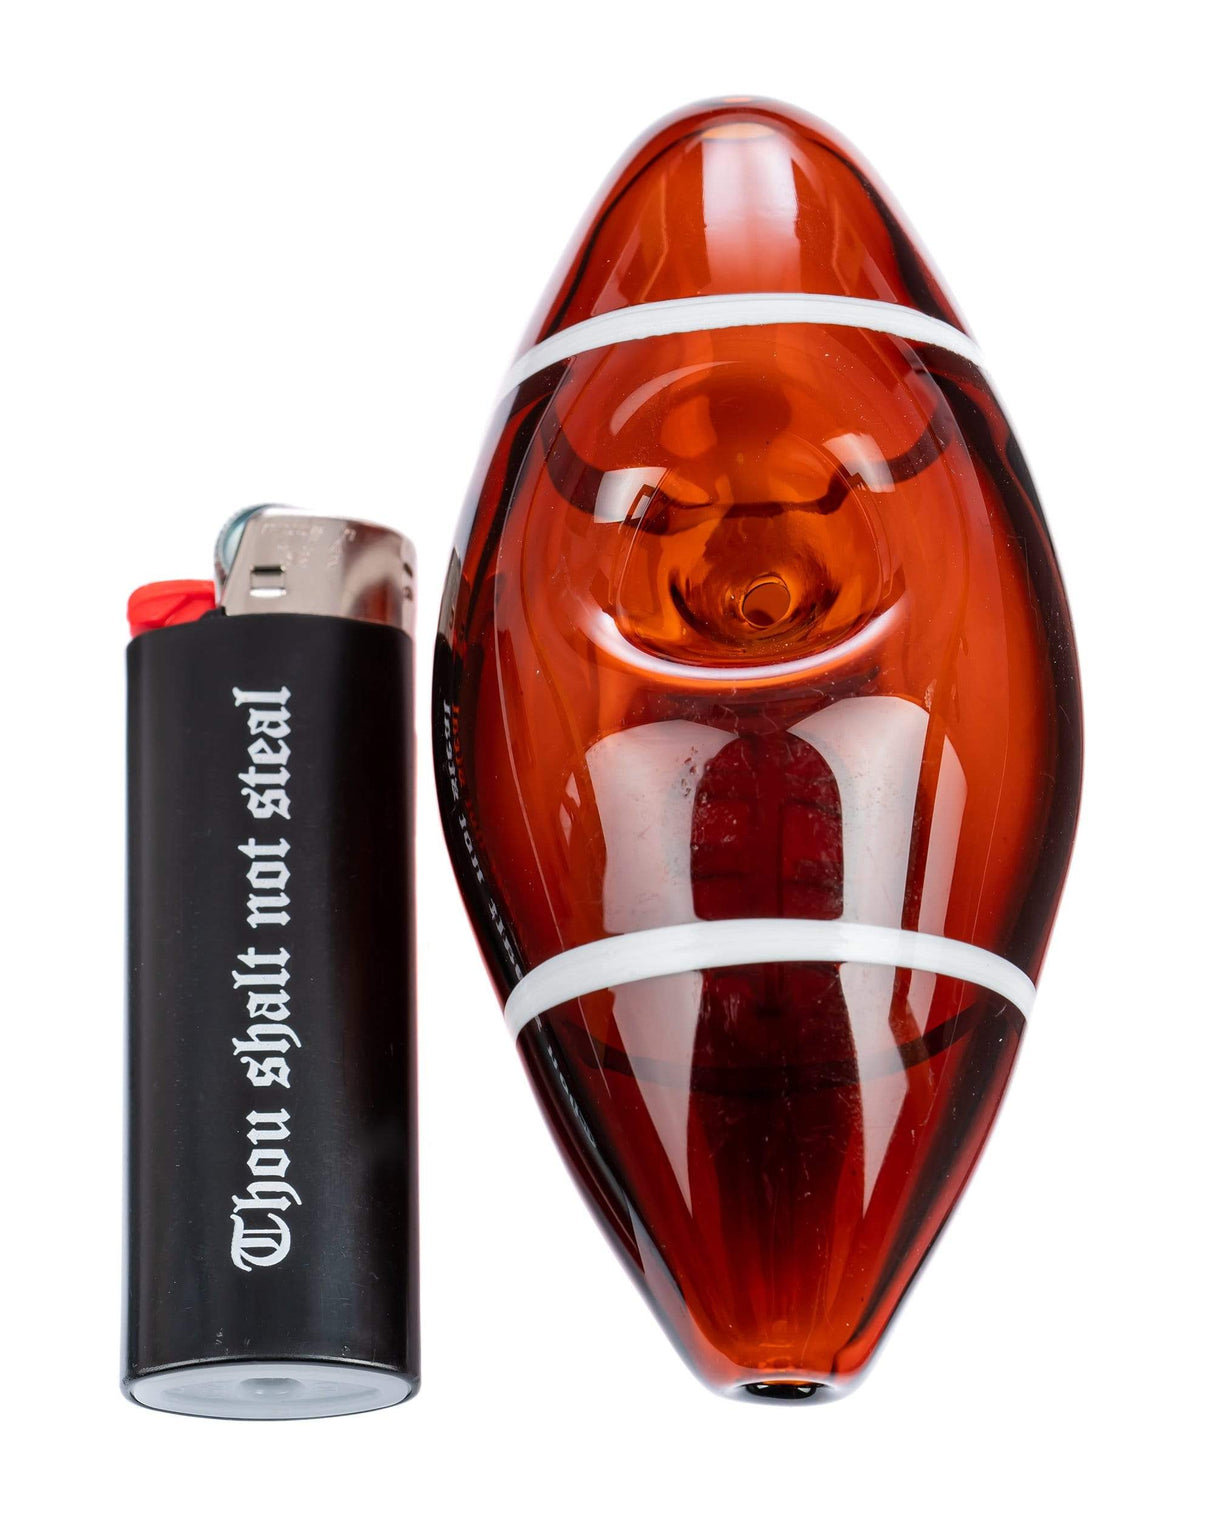 Amber Touchdown Glass Steamroller by Valiant Distribution - 4" Compact Size with Football Design